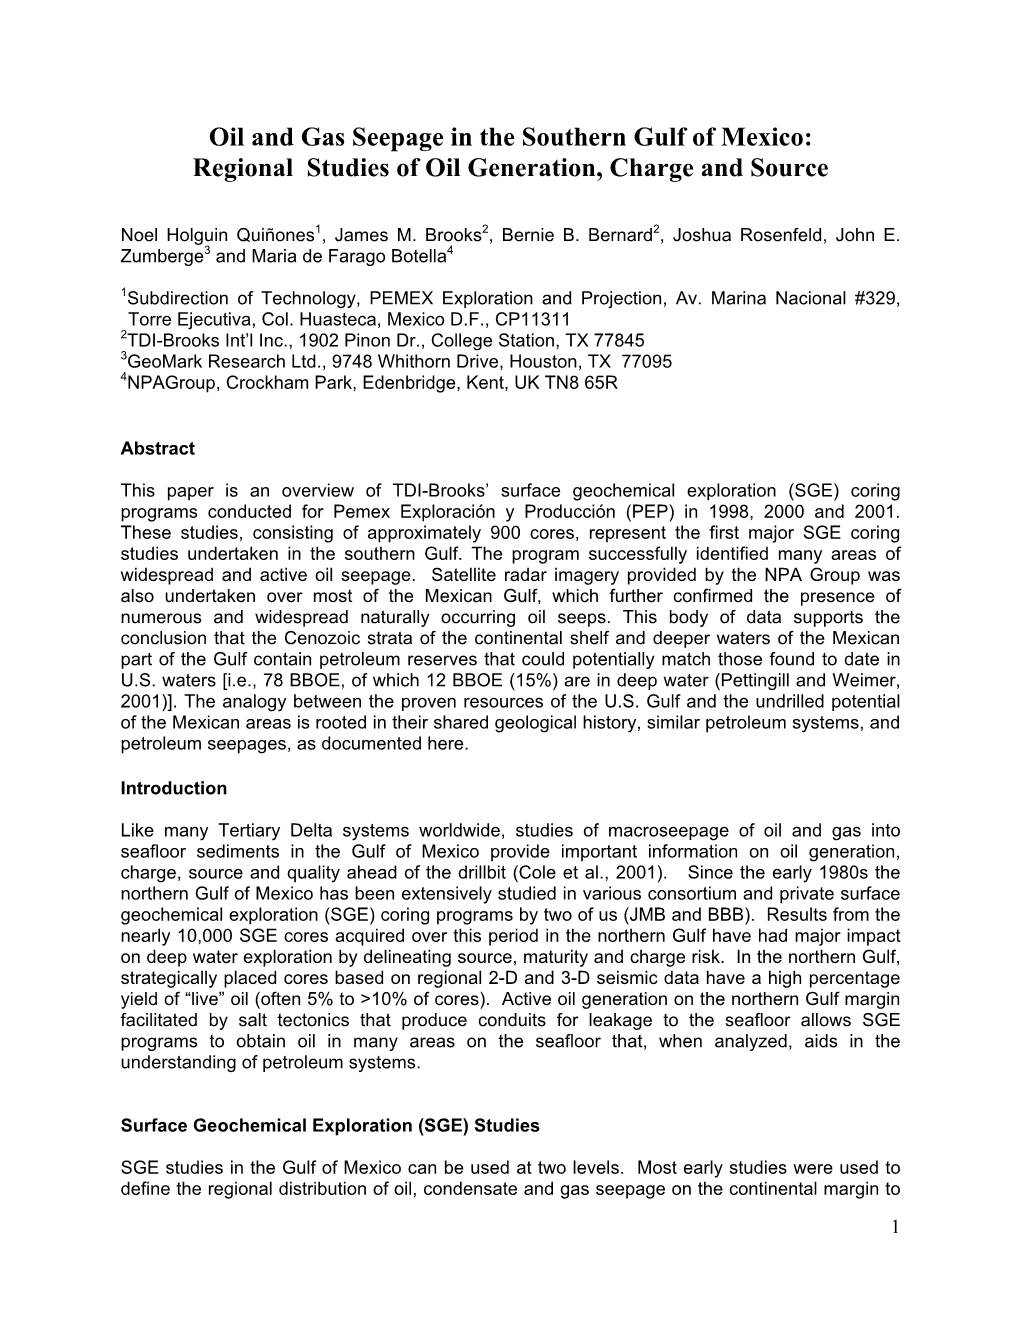 Oil and Gas Seepage in the Southern Gulf of Mexico: Regional Studies of Oil Generation, Charge and Source